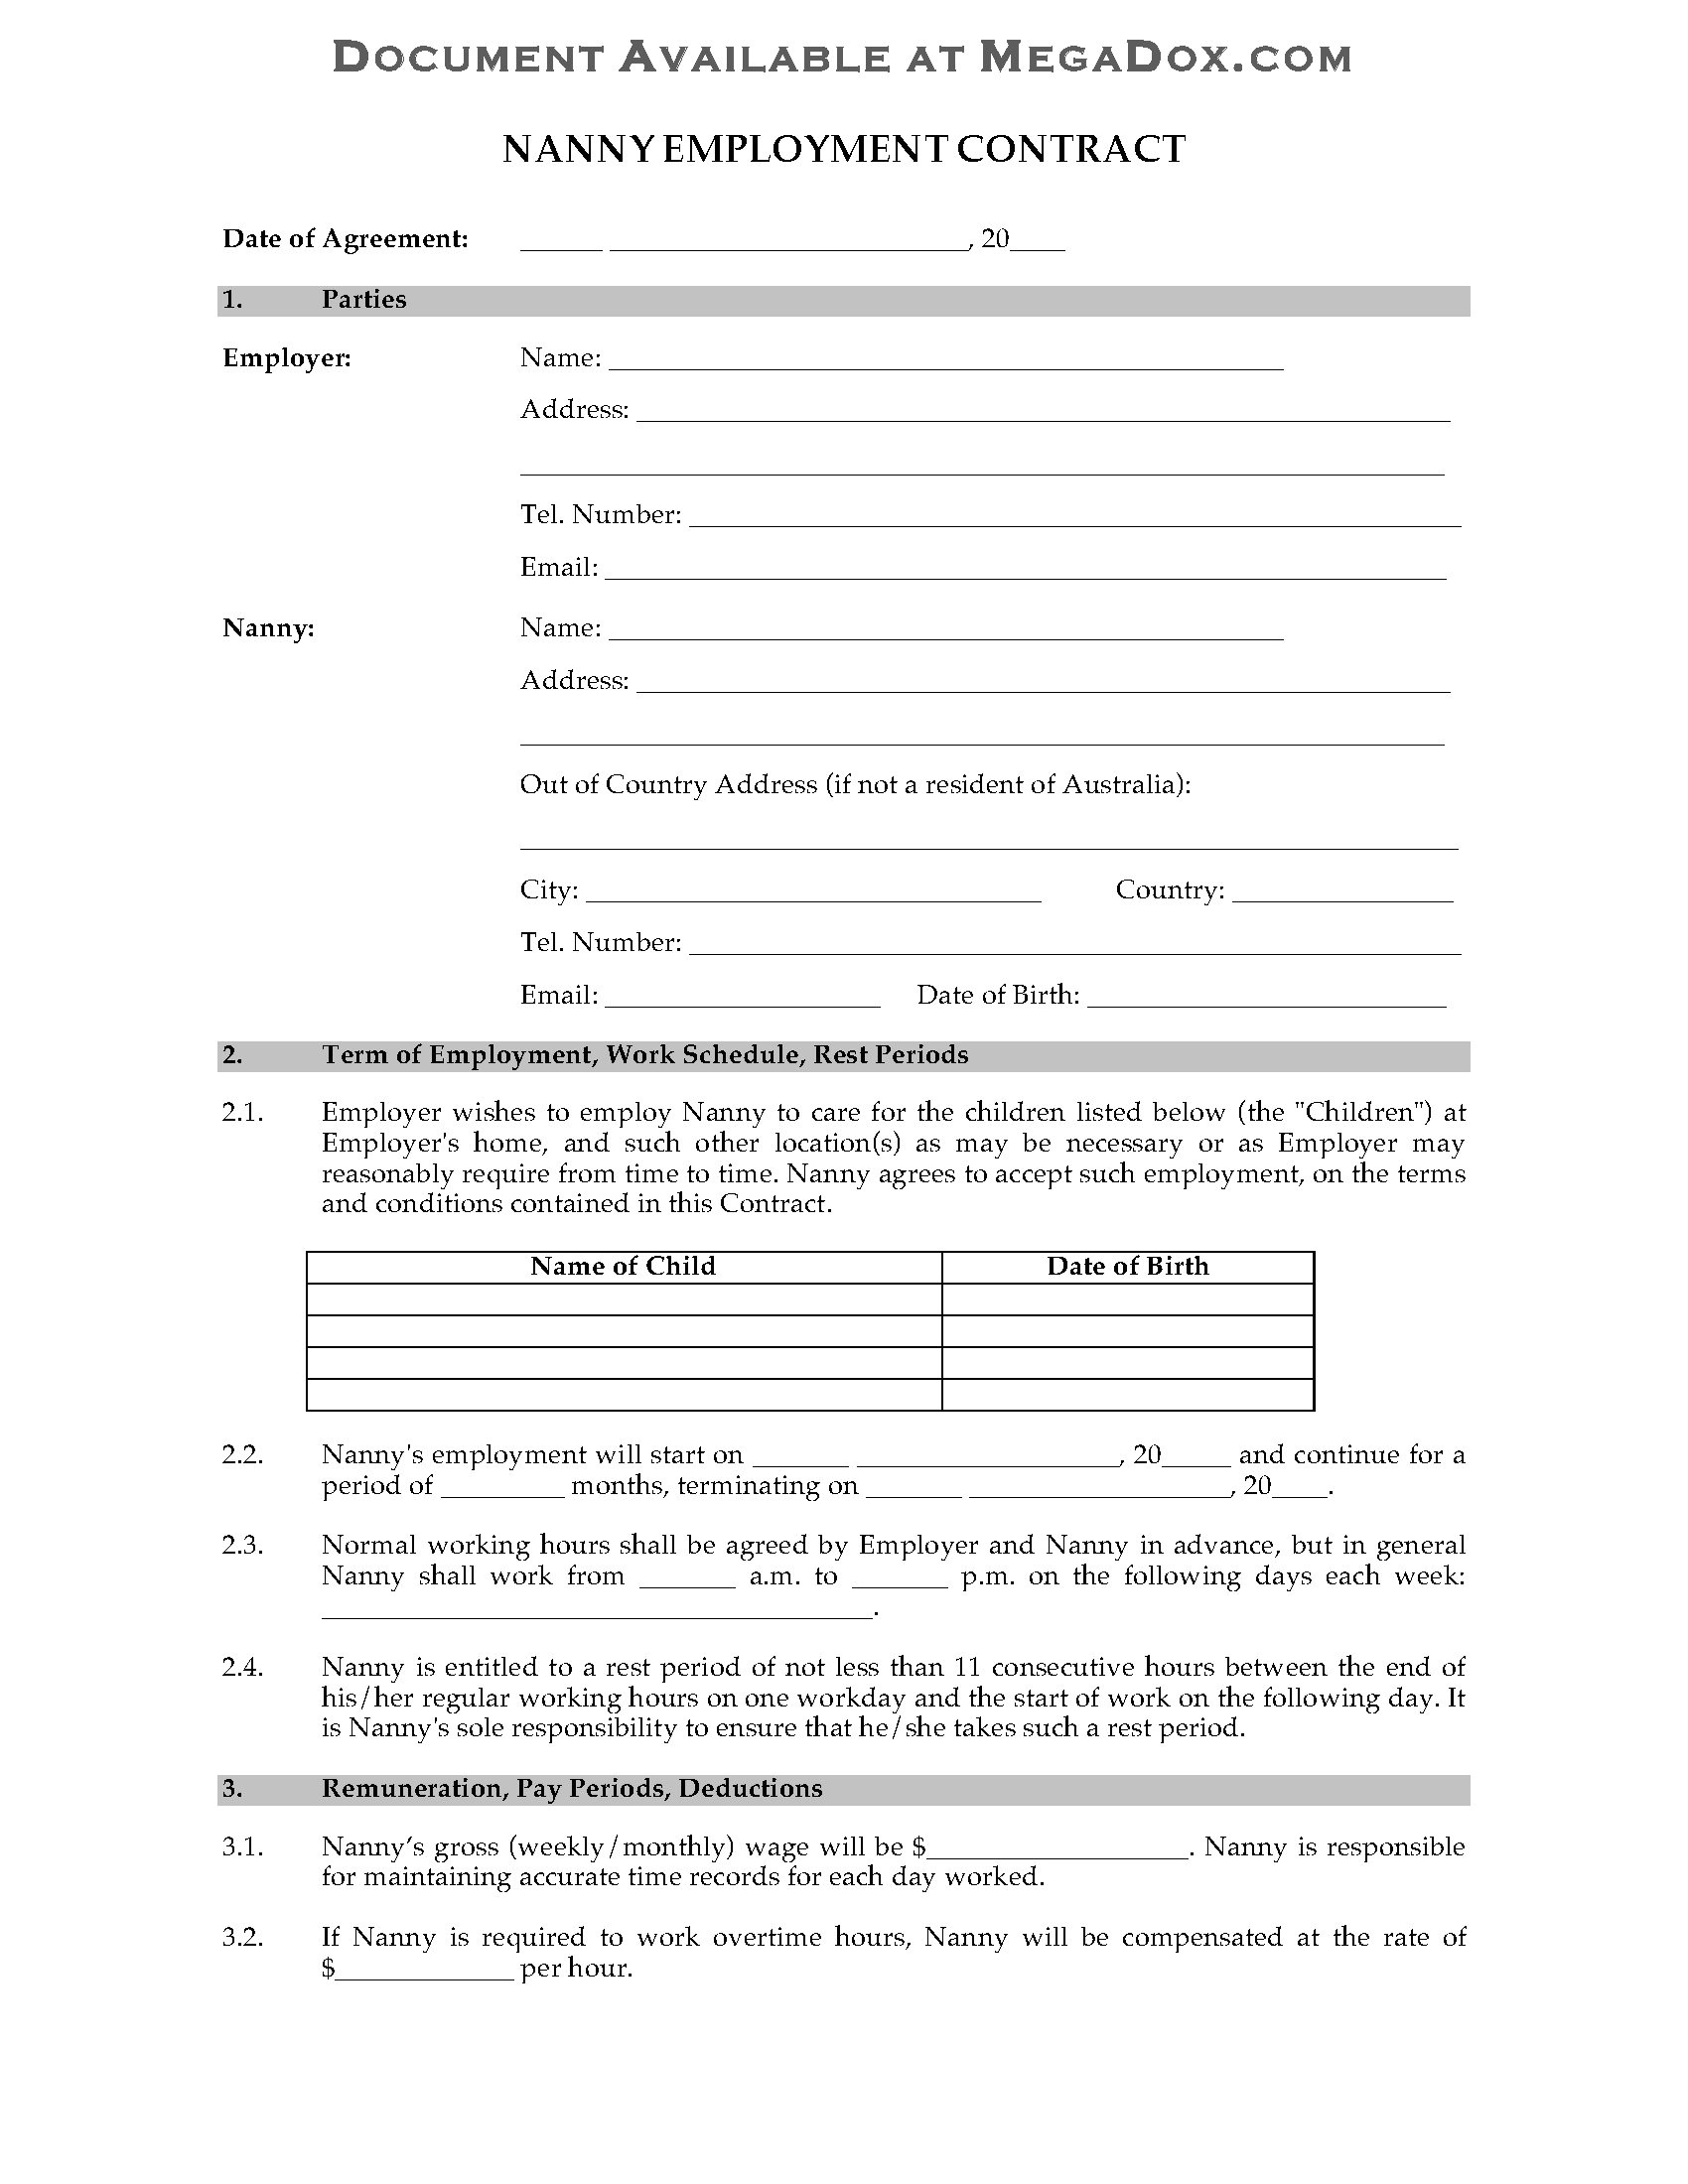 Nanny Contract Template Australia Australia Nanny Employment Contract Legal forms and